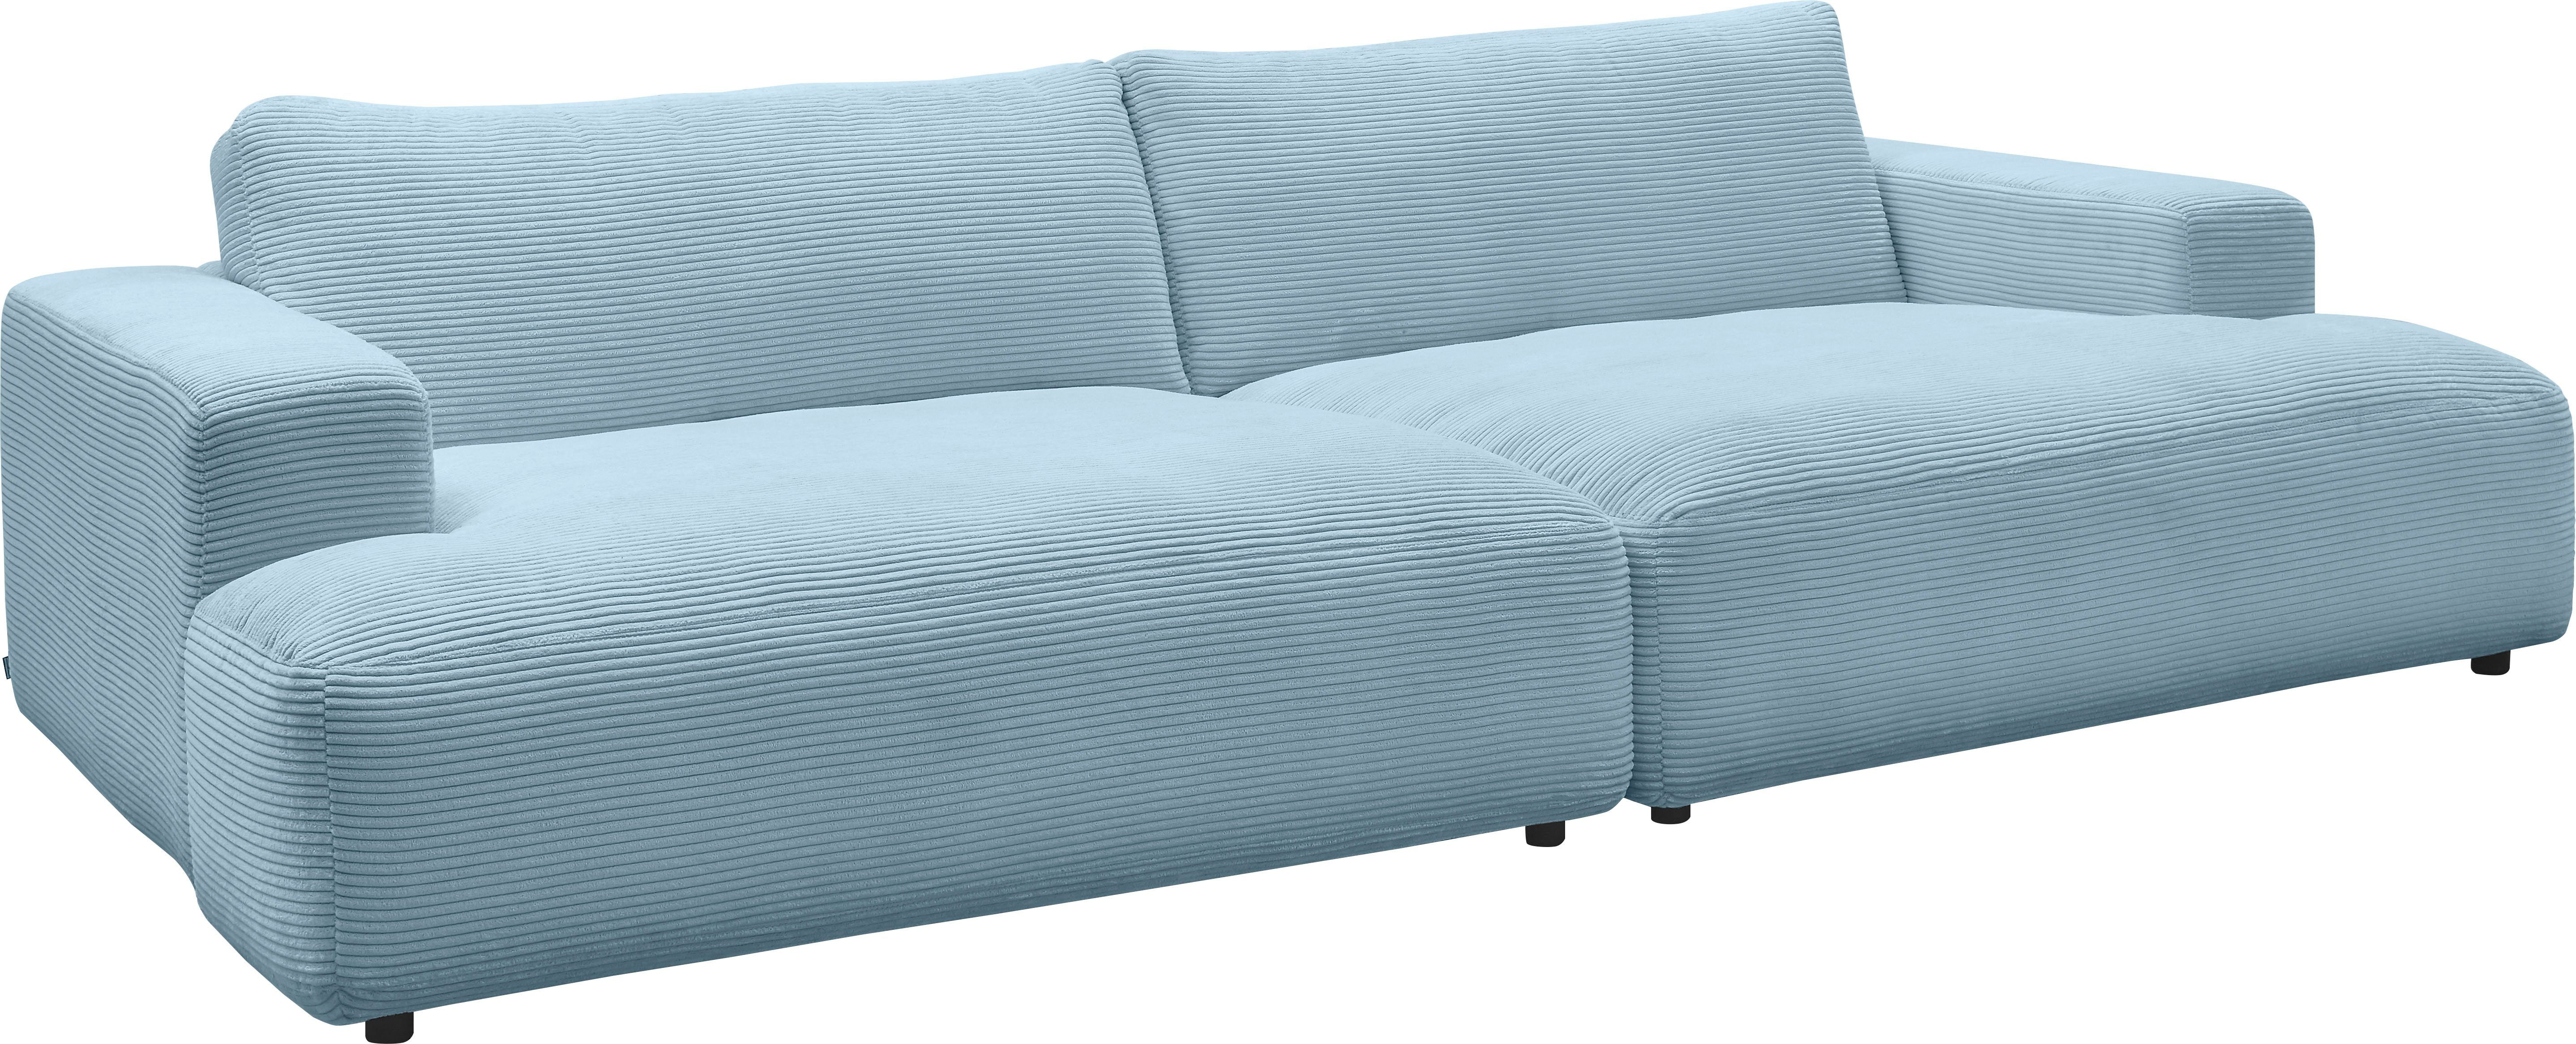 Musterring by light-blue Lucia, 292 Cord-Bezug, Loungesofa GALLERY branded M cm Breite